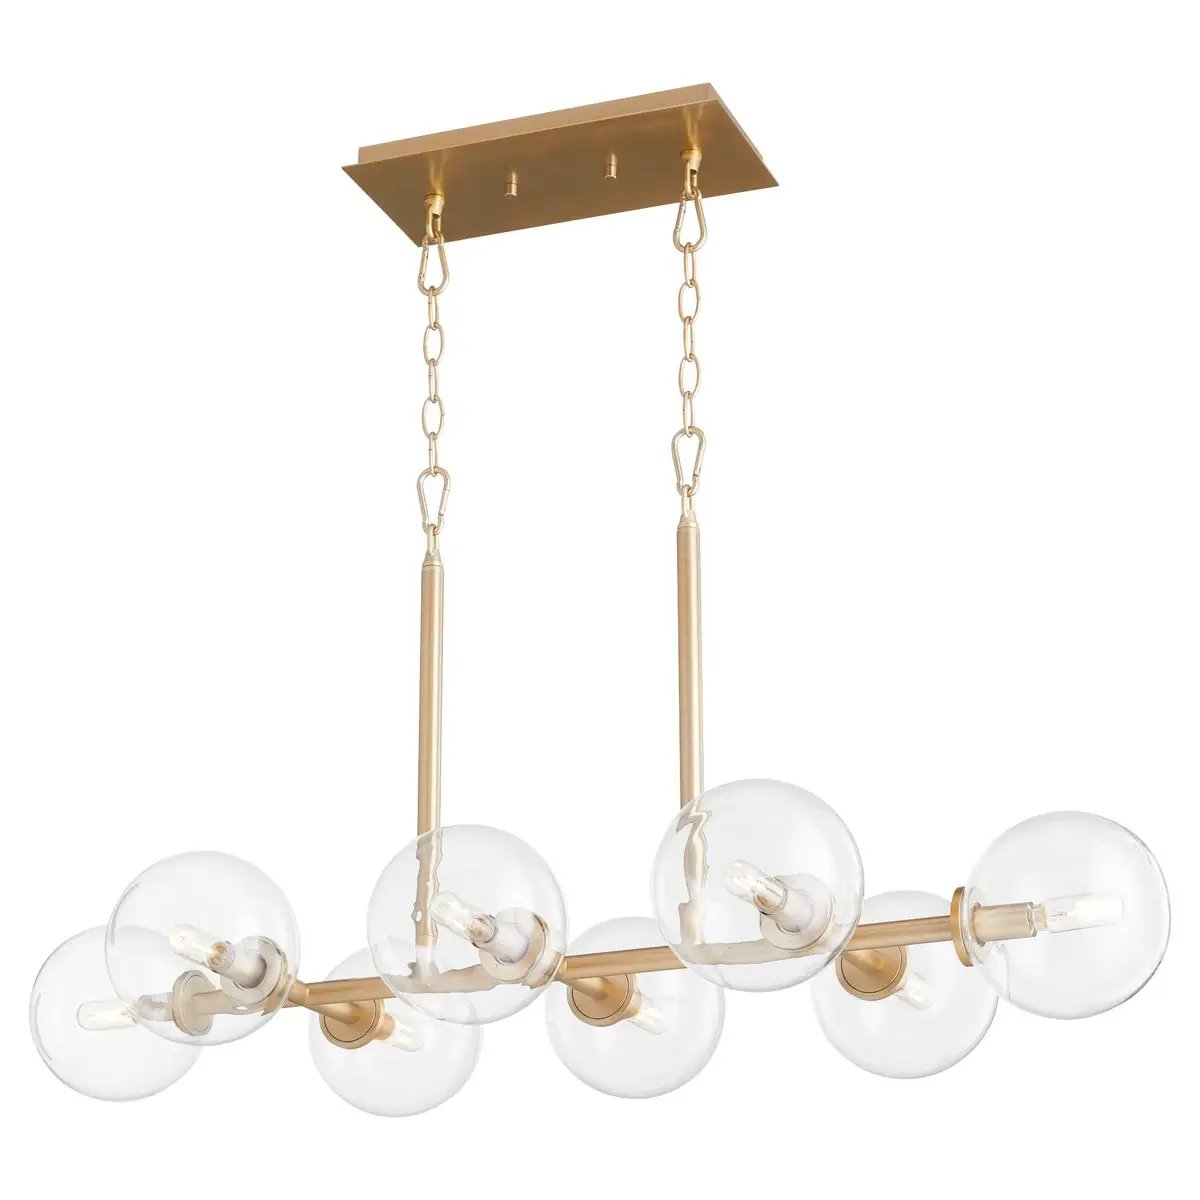 Linear Sputnik Chandelier with clear glass domes and aged brass frames, creating a mid-century modern appeal. Wow your guests with this brilliant design.